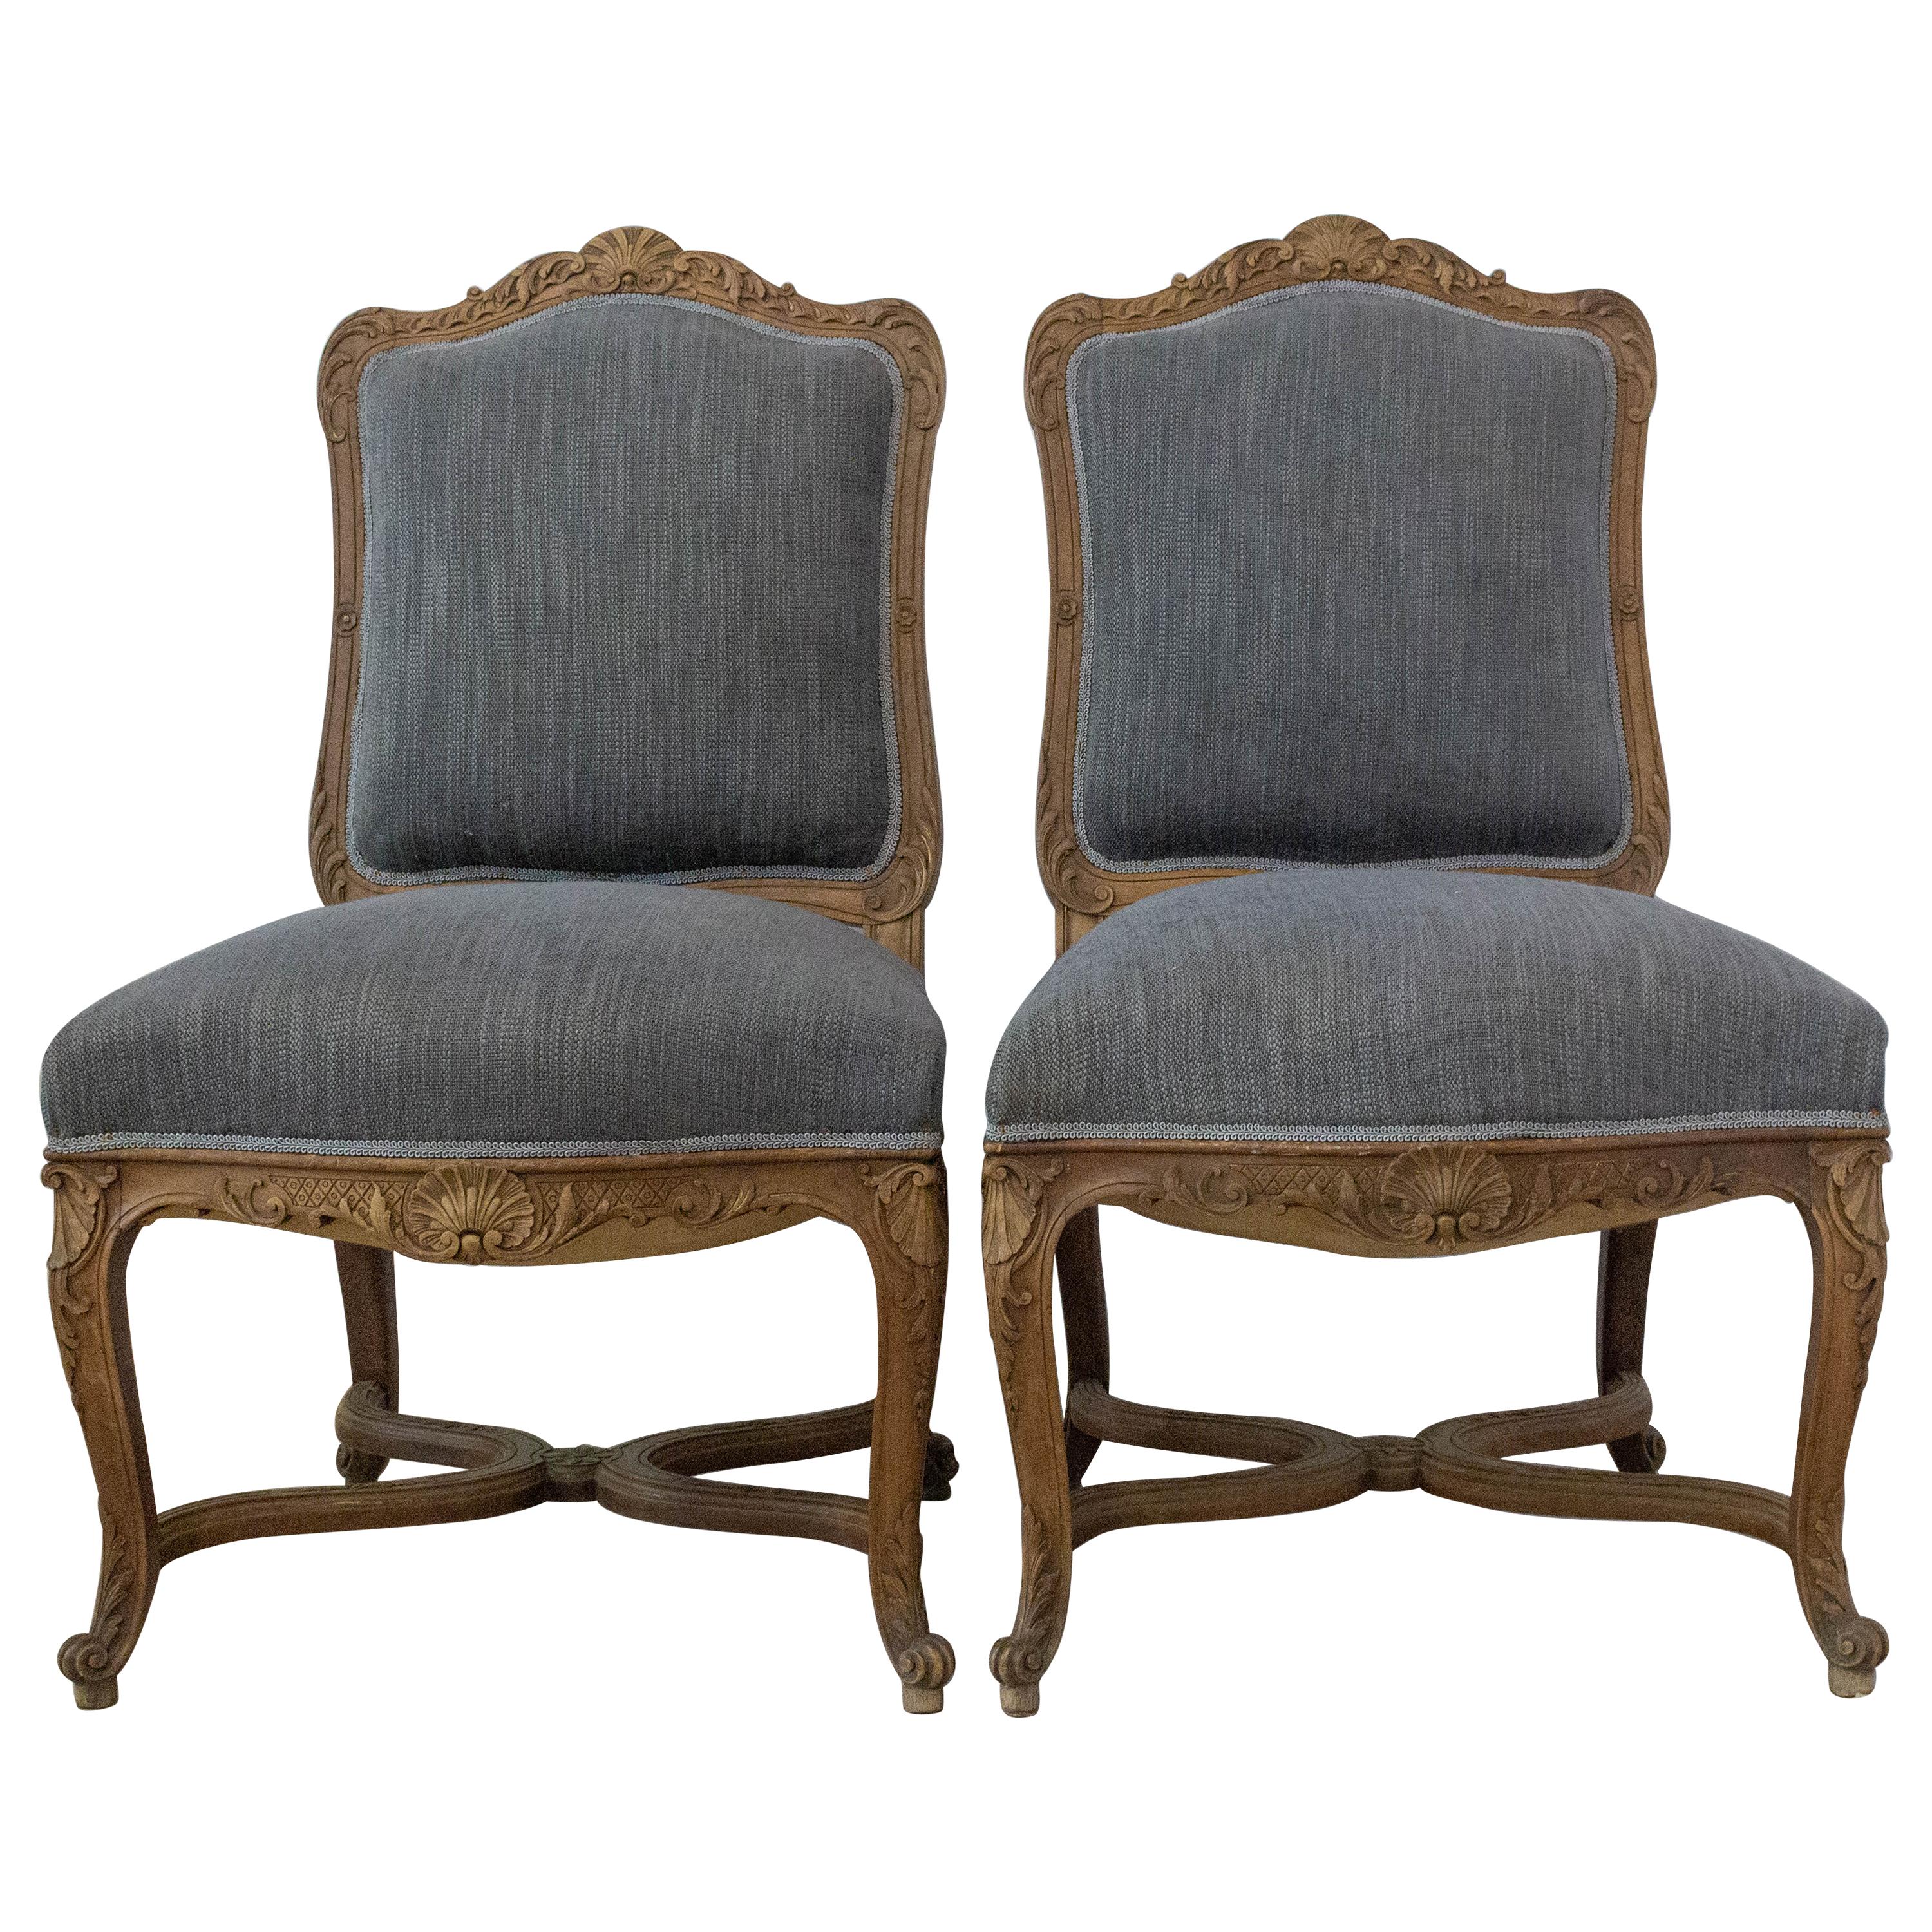 Pair of Regency Chairs or Fauteuils to be Re-Upholstered Midcentury For Sale